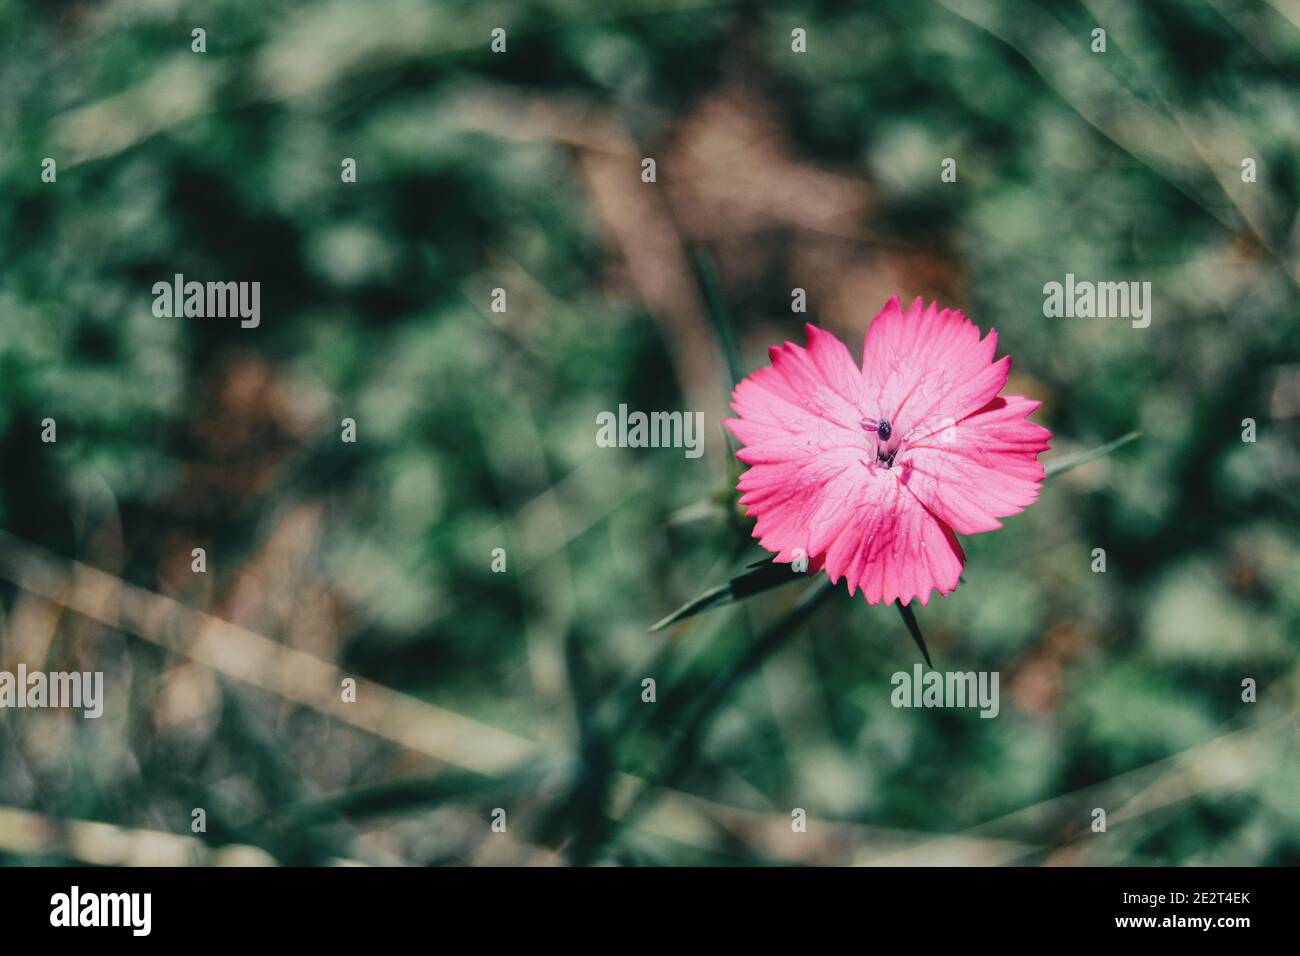 a single small dianthus flower in a field Stock Photo